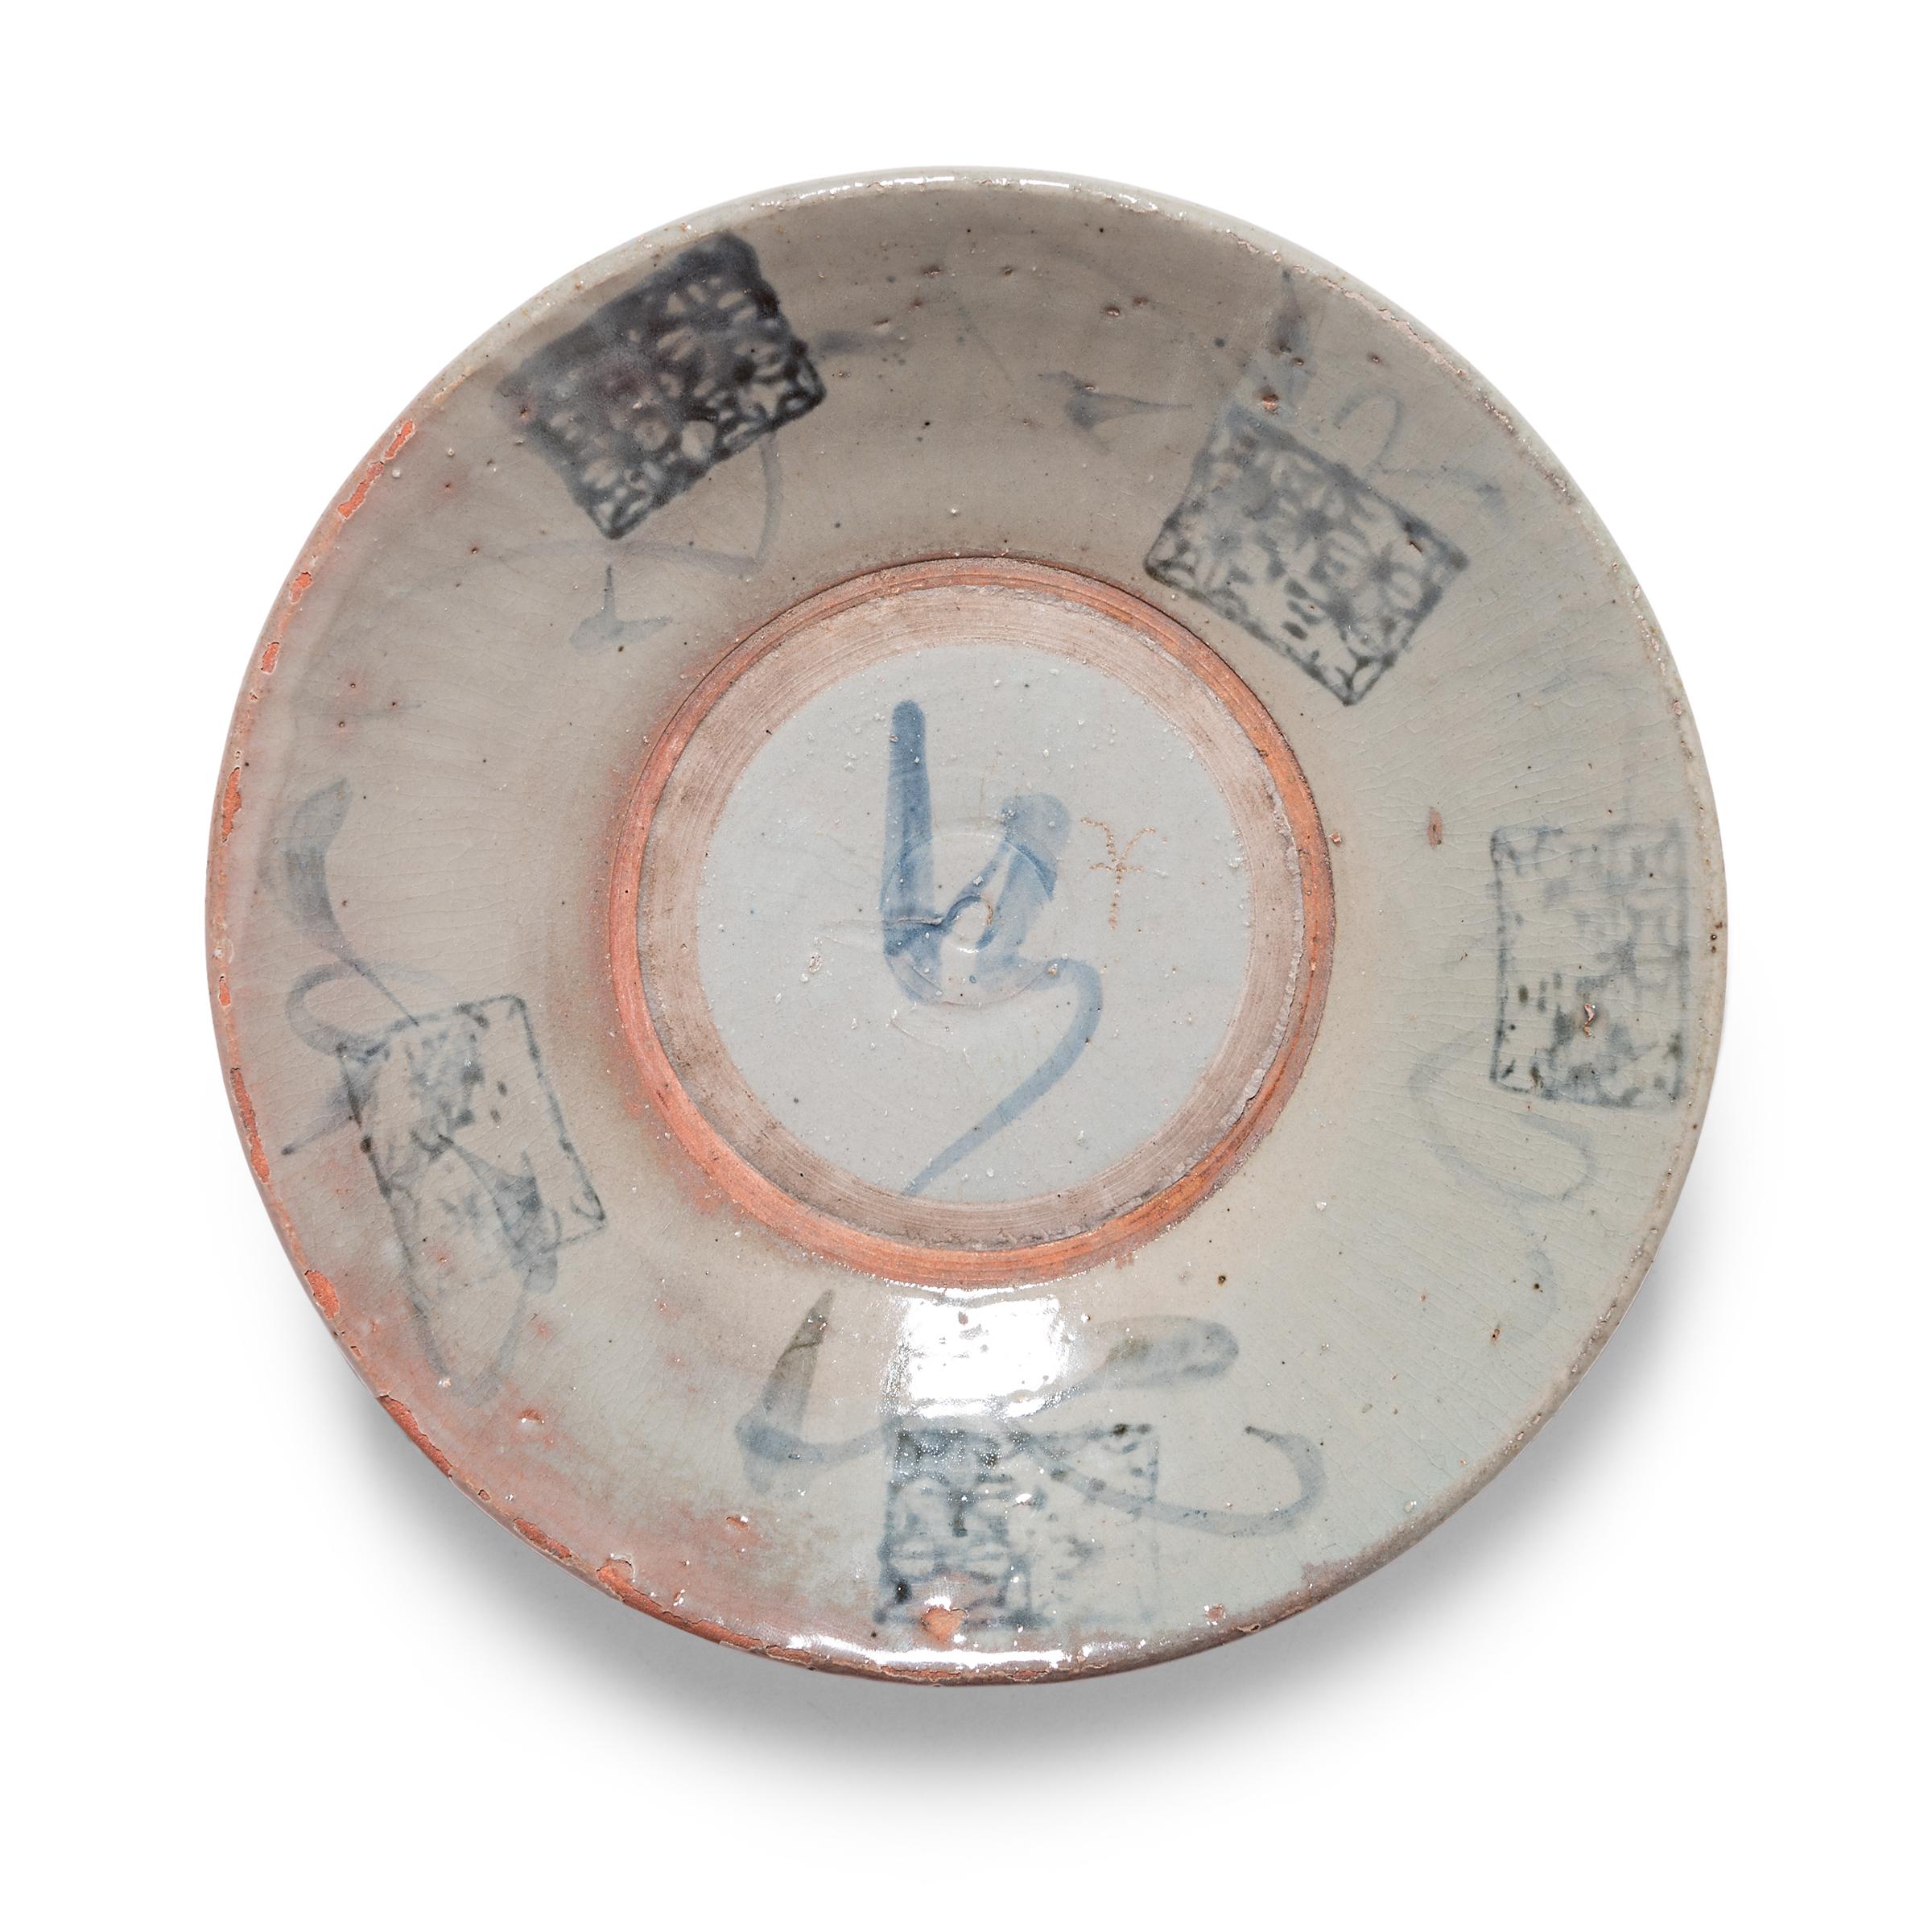 Calligraphic sweeps of blue bring this early 20th century footed plate to life, adorning the crazed blue-grey glaze that cloaks its terracotta form. Atop the freeform brushwork is a lattice-like pattern of coin motifs, likely applied with a stamp.